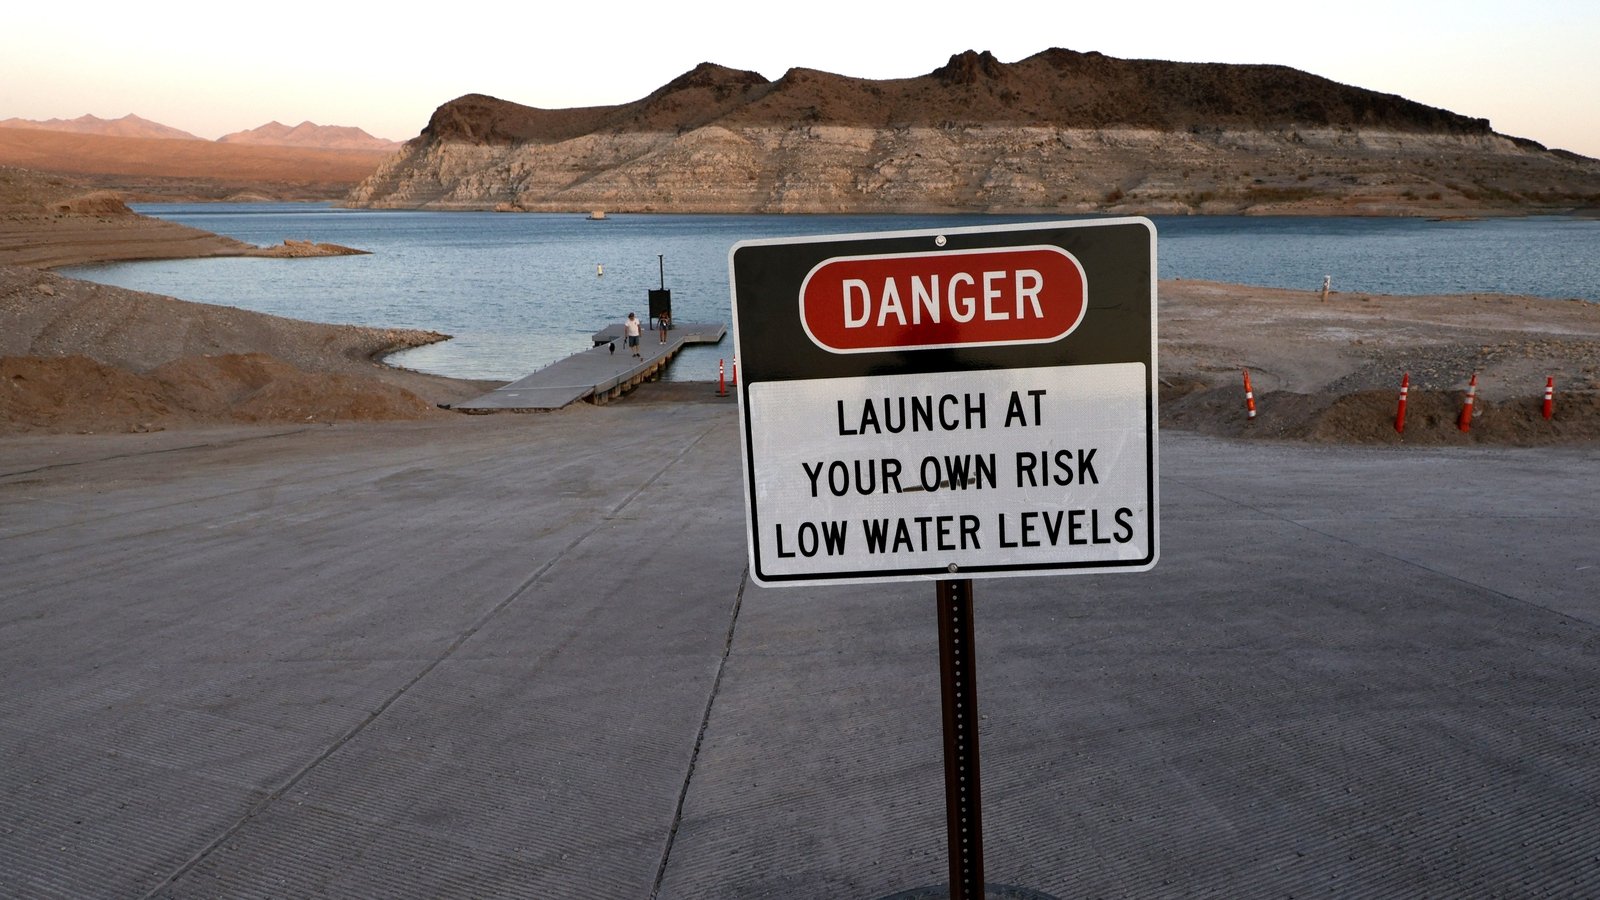 Hoover Dam's Lake Mead at historic low water level - RTE.ie